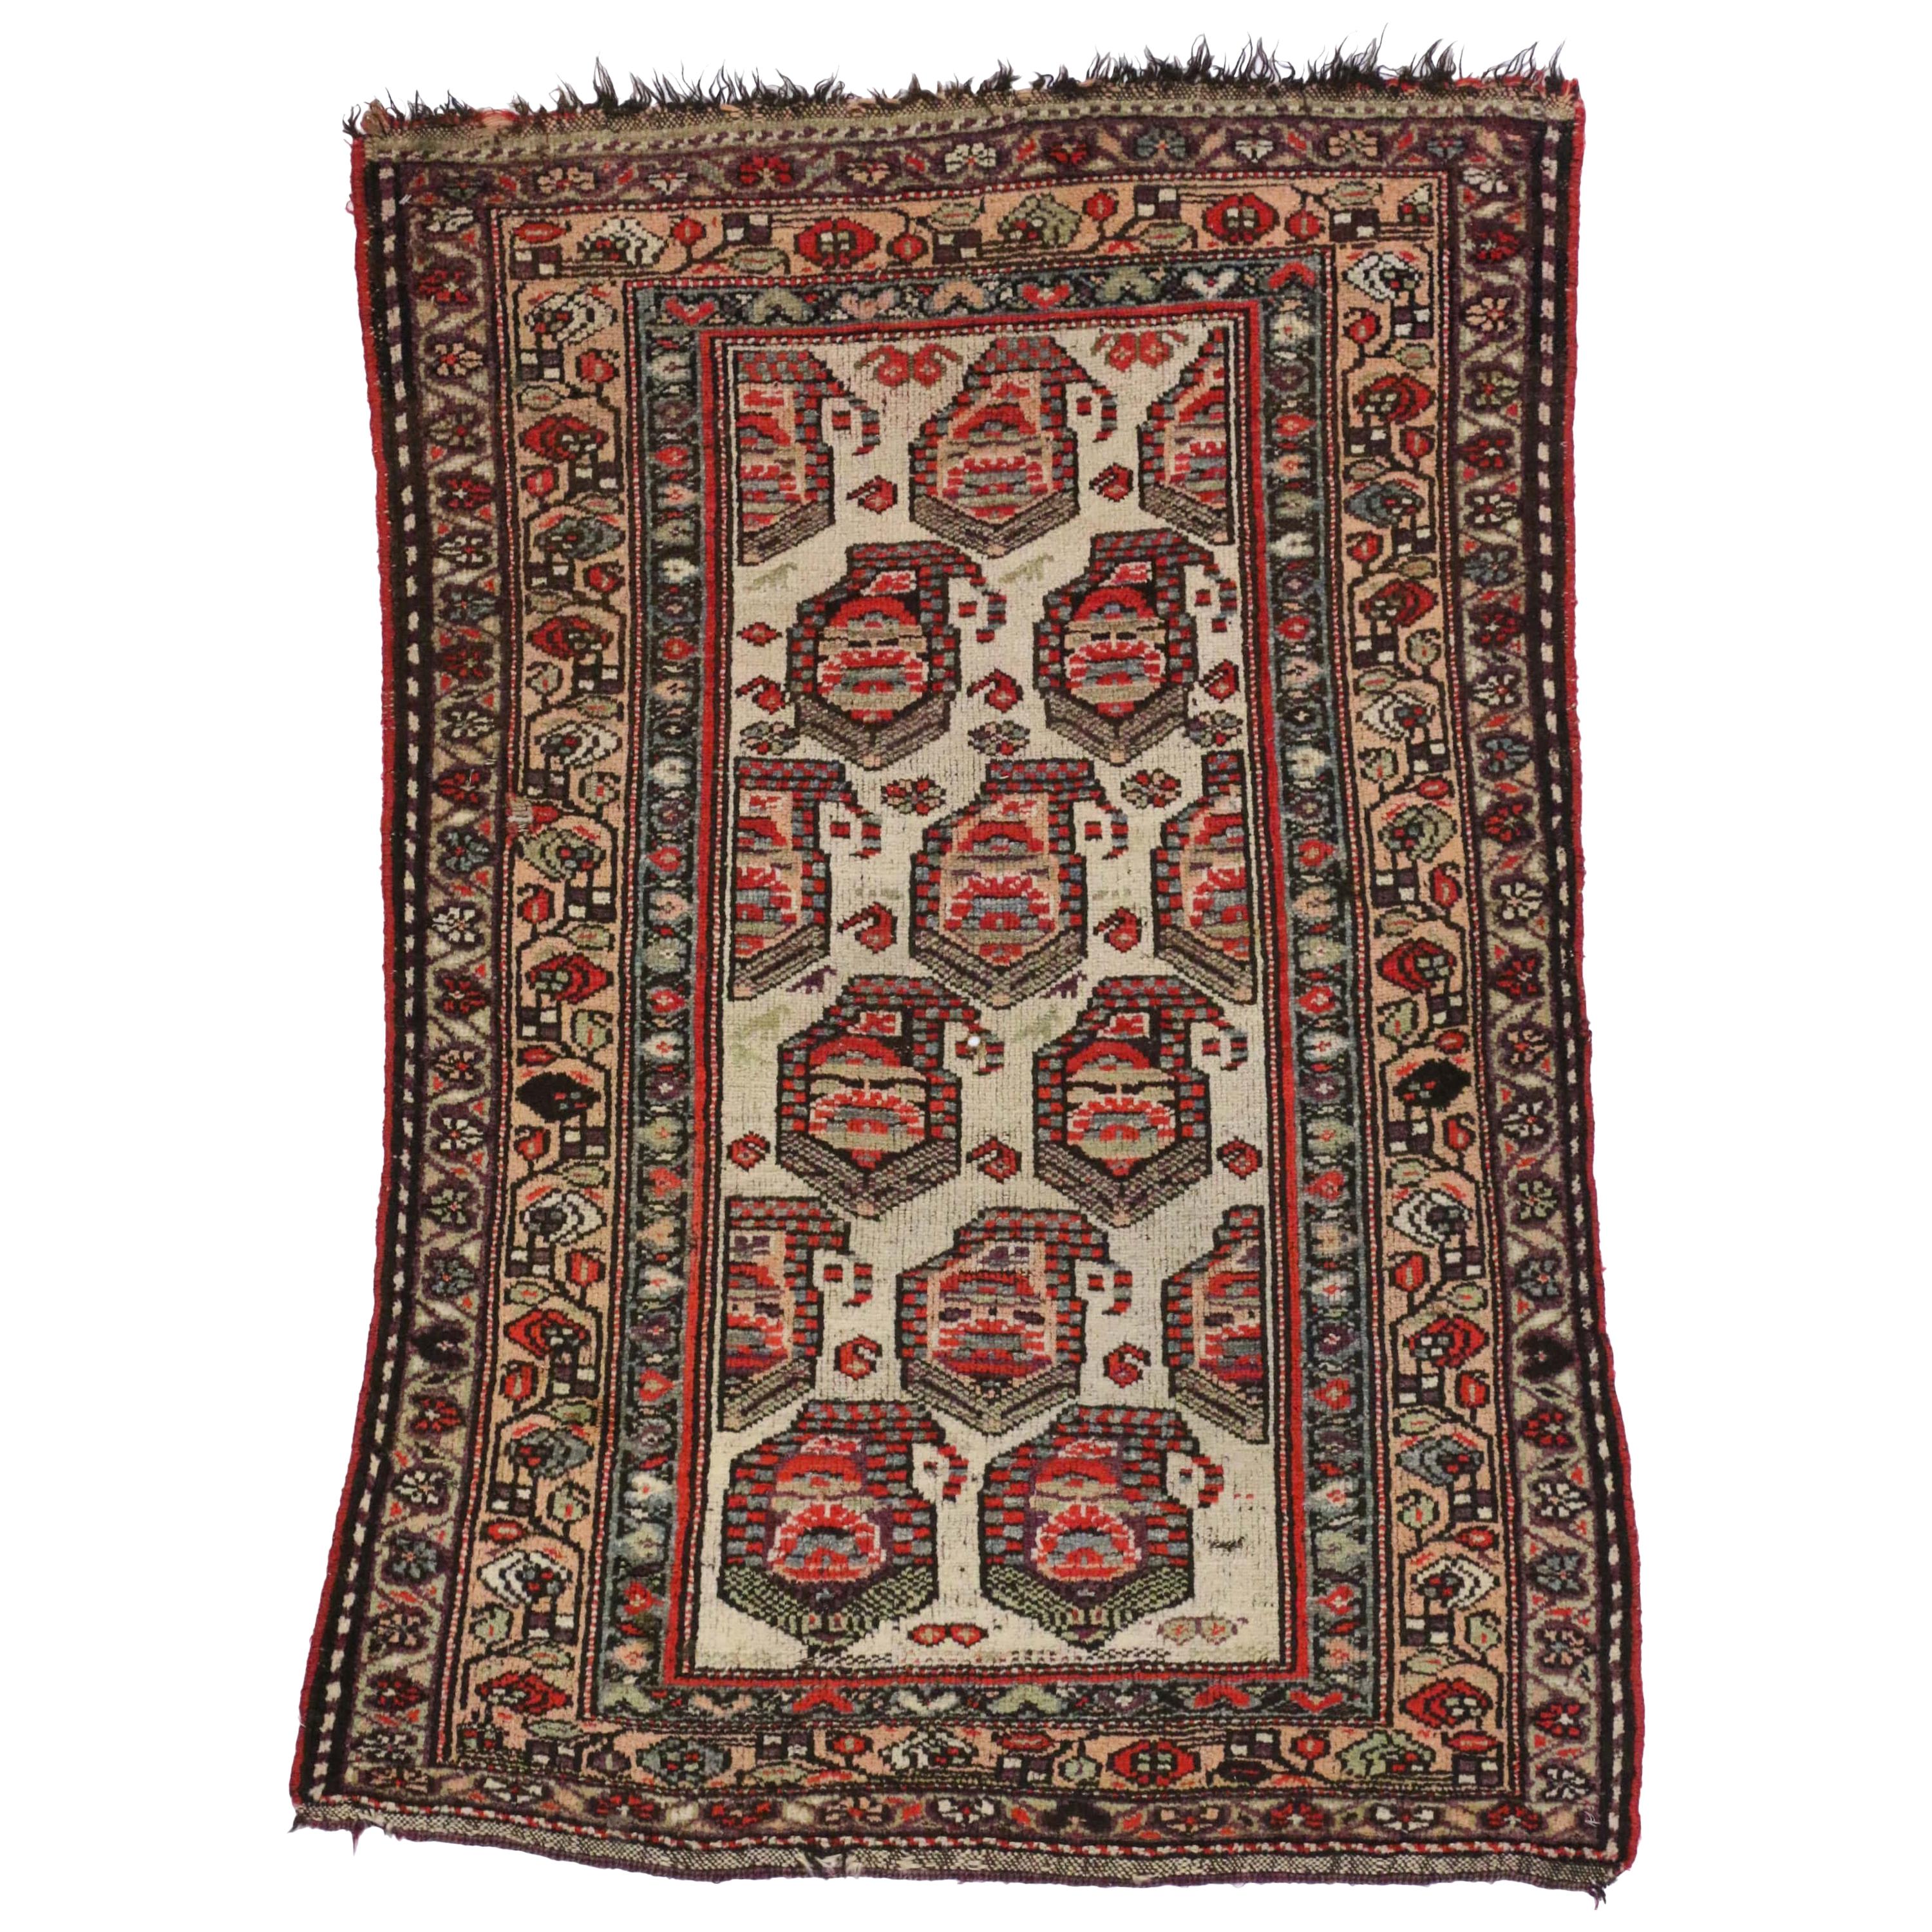 Antique Kurdish Persian Accent Rug with Boteh Pattern in Traditional Style